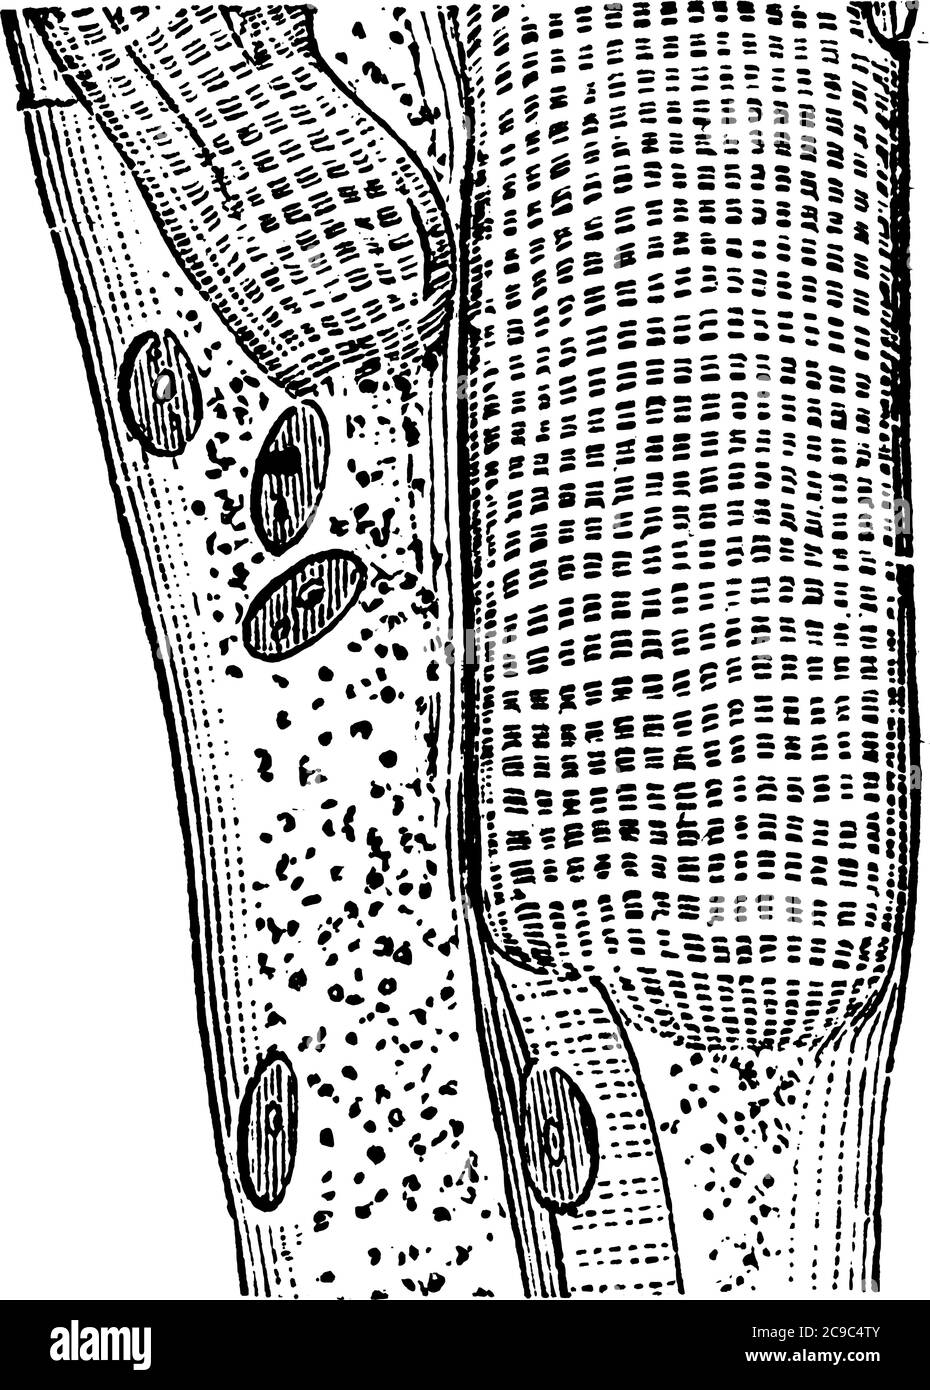 A muscle fiber is composed of many fibrils, which give the cell its striated appearance. Shown here is a Portion of striped Muscular Fiber, with strip Stock Vector